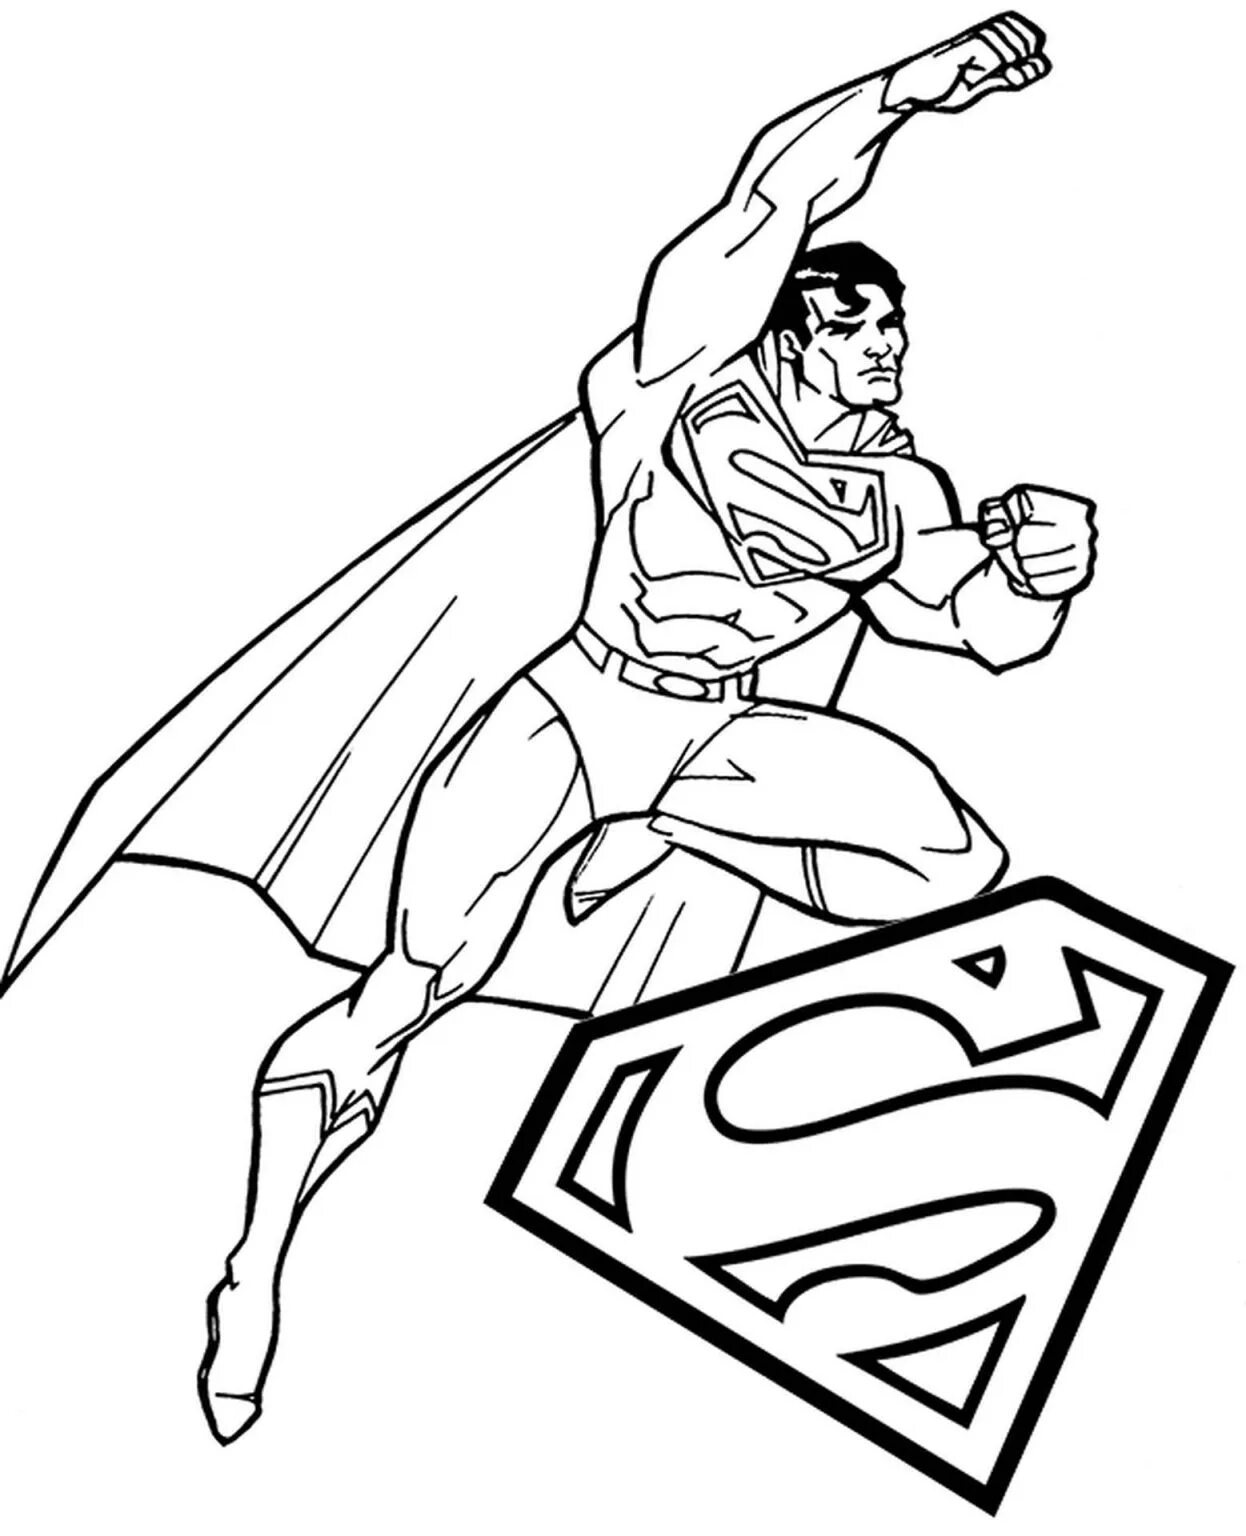 Superman Explosive Coloring Book for 3-4 year olds